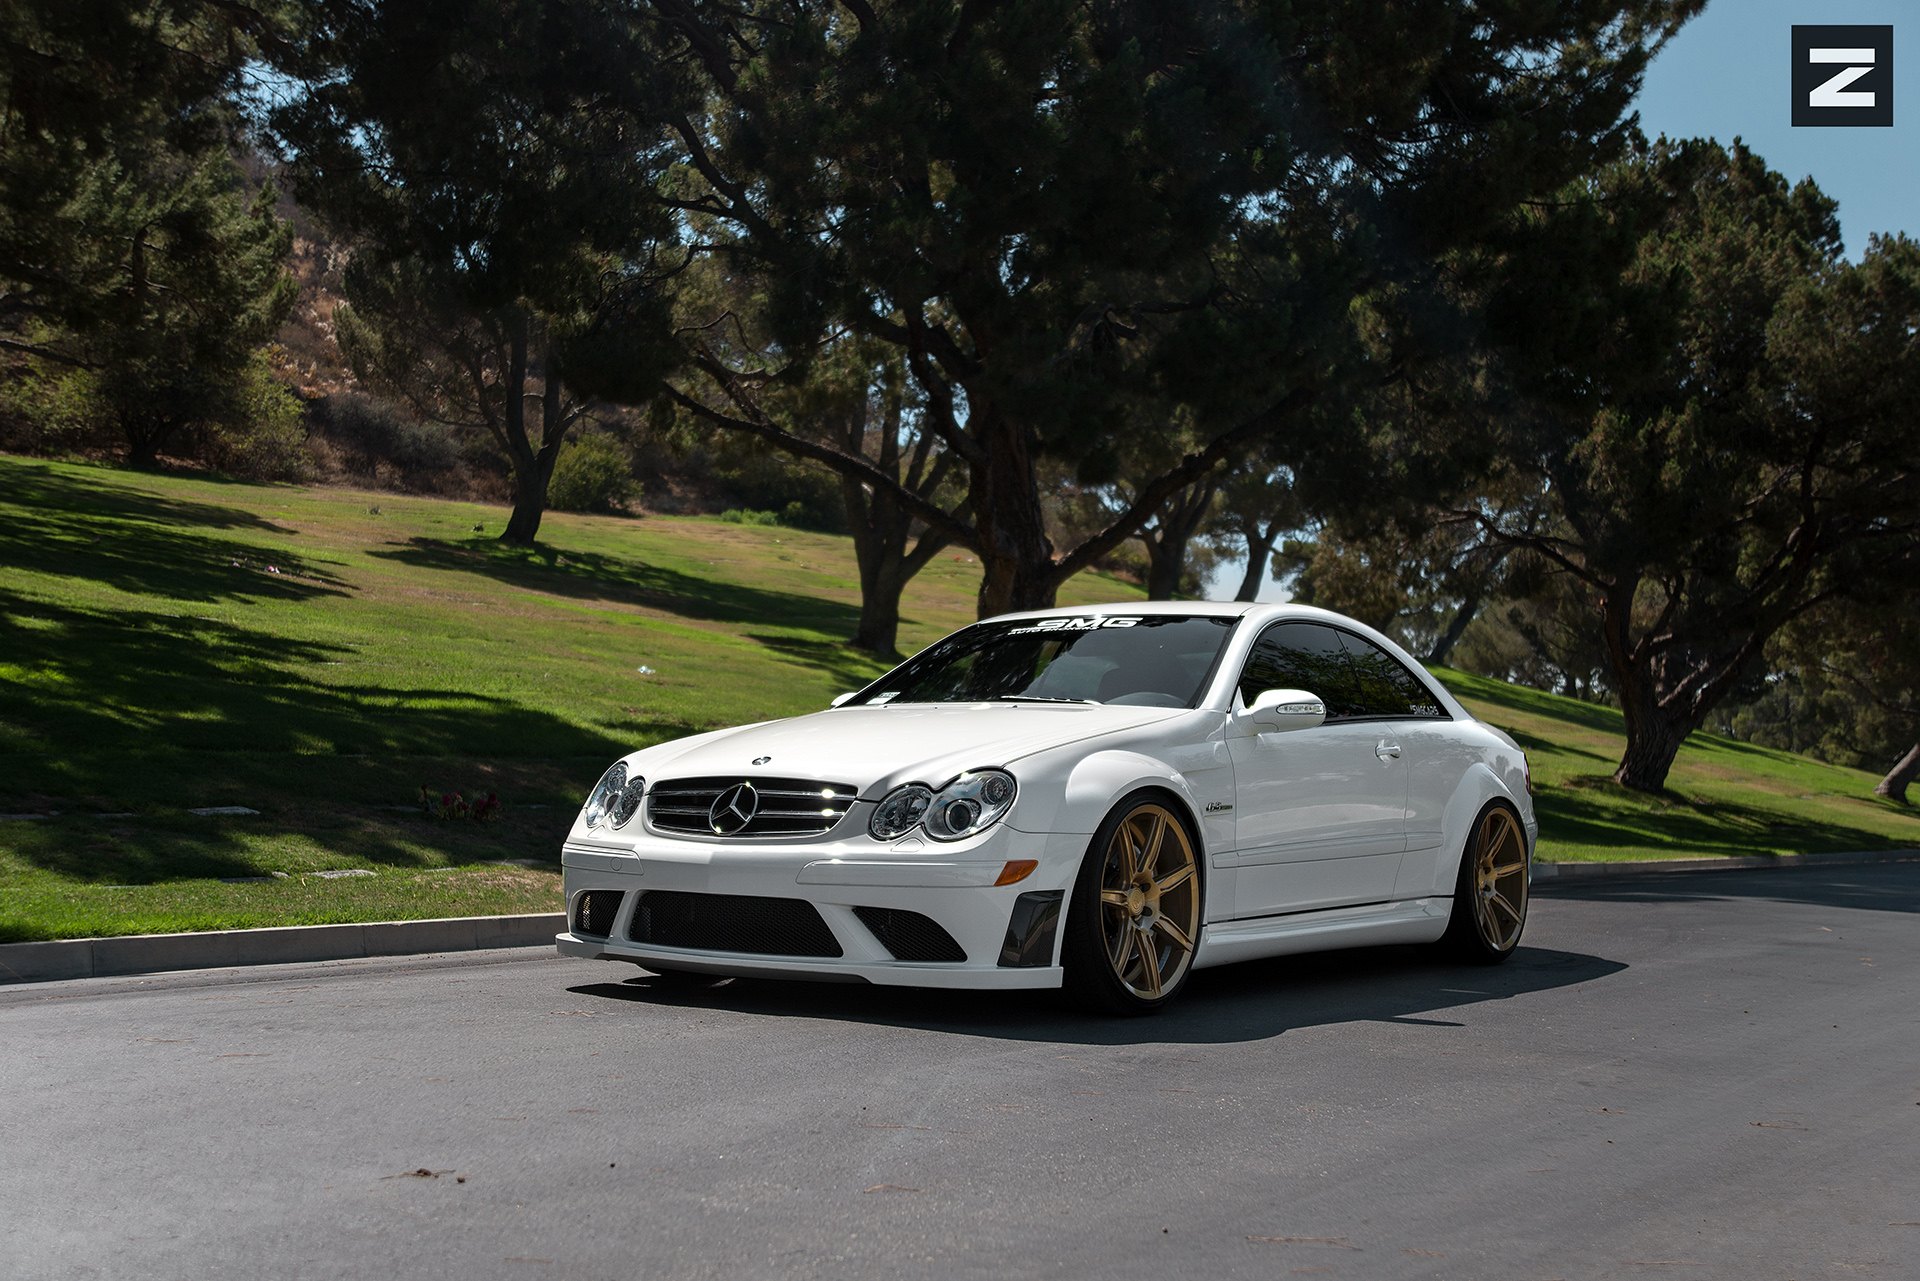 White Mercedes CLK Class with Custom Front Bumper - Photo by Zito Wheels